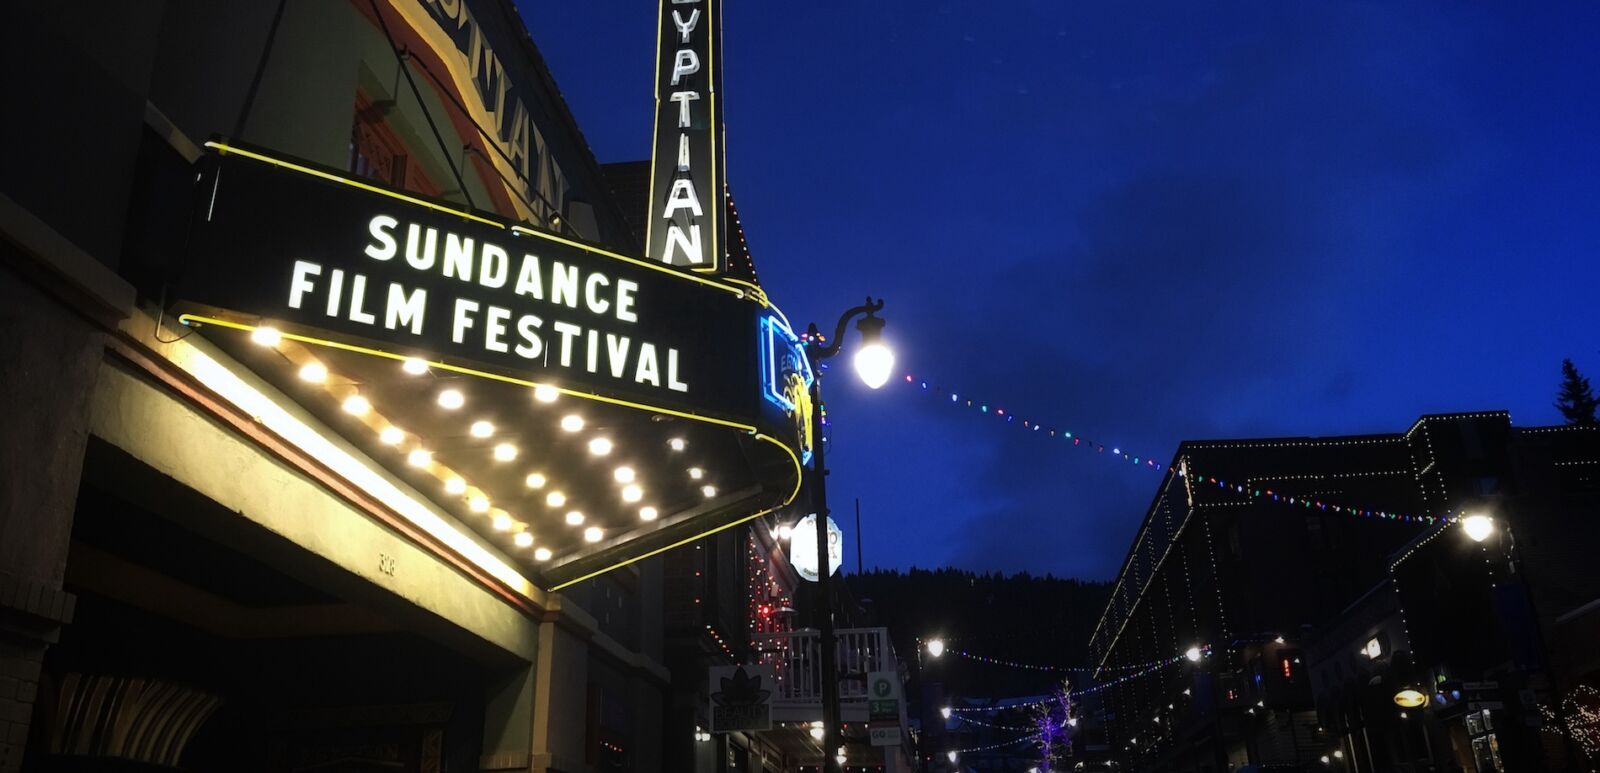 gyptian Theater during the Sundance film festival is one of the popular theaters playing movies in the festival.